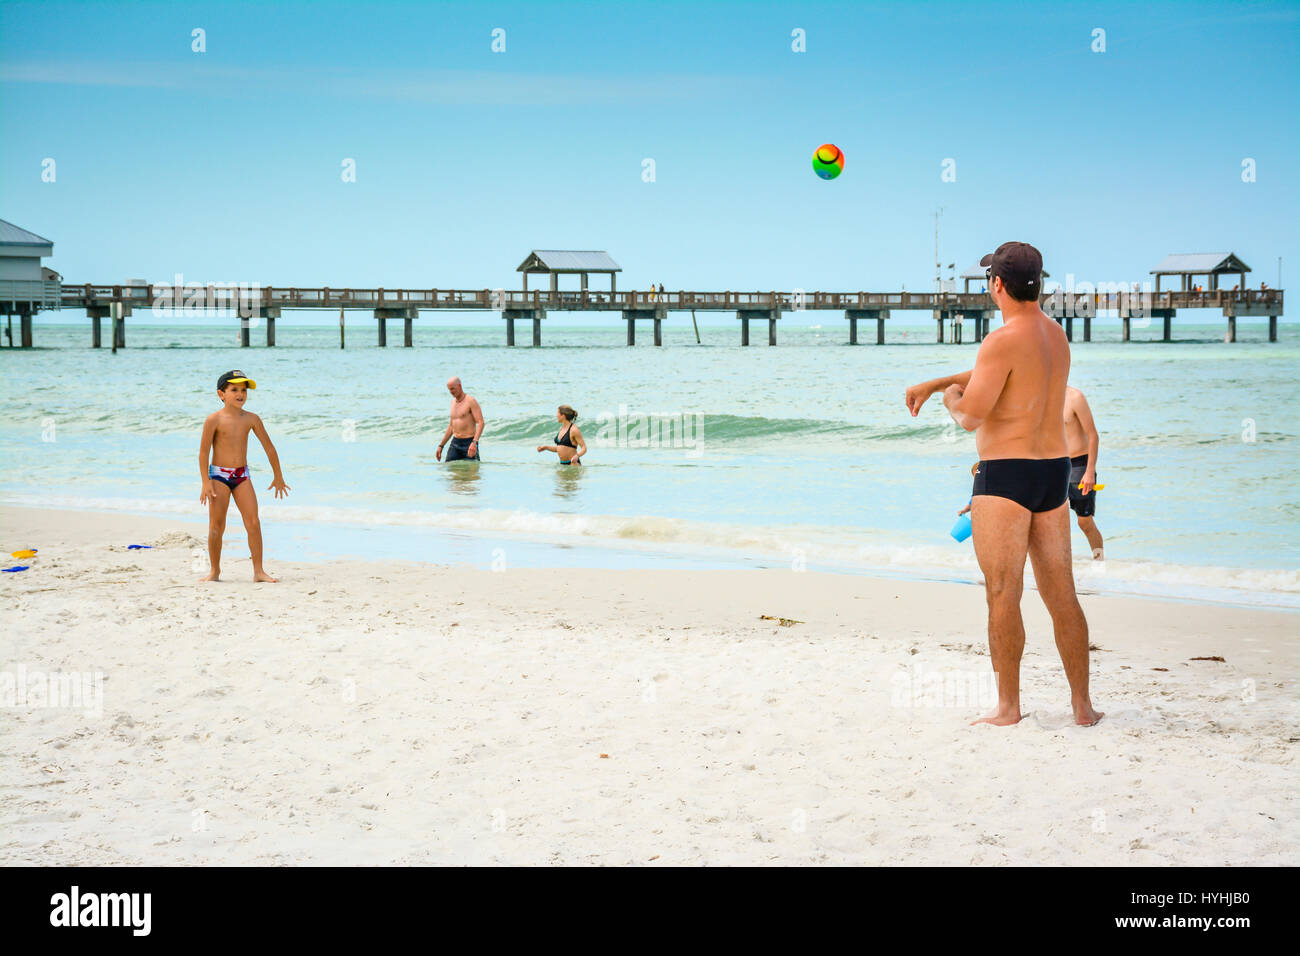 Speedo Beach High Resolution Stock Photography and Images - Alamy